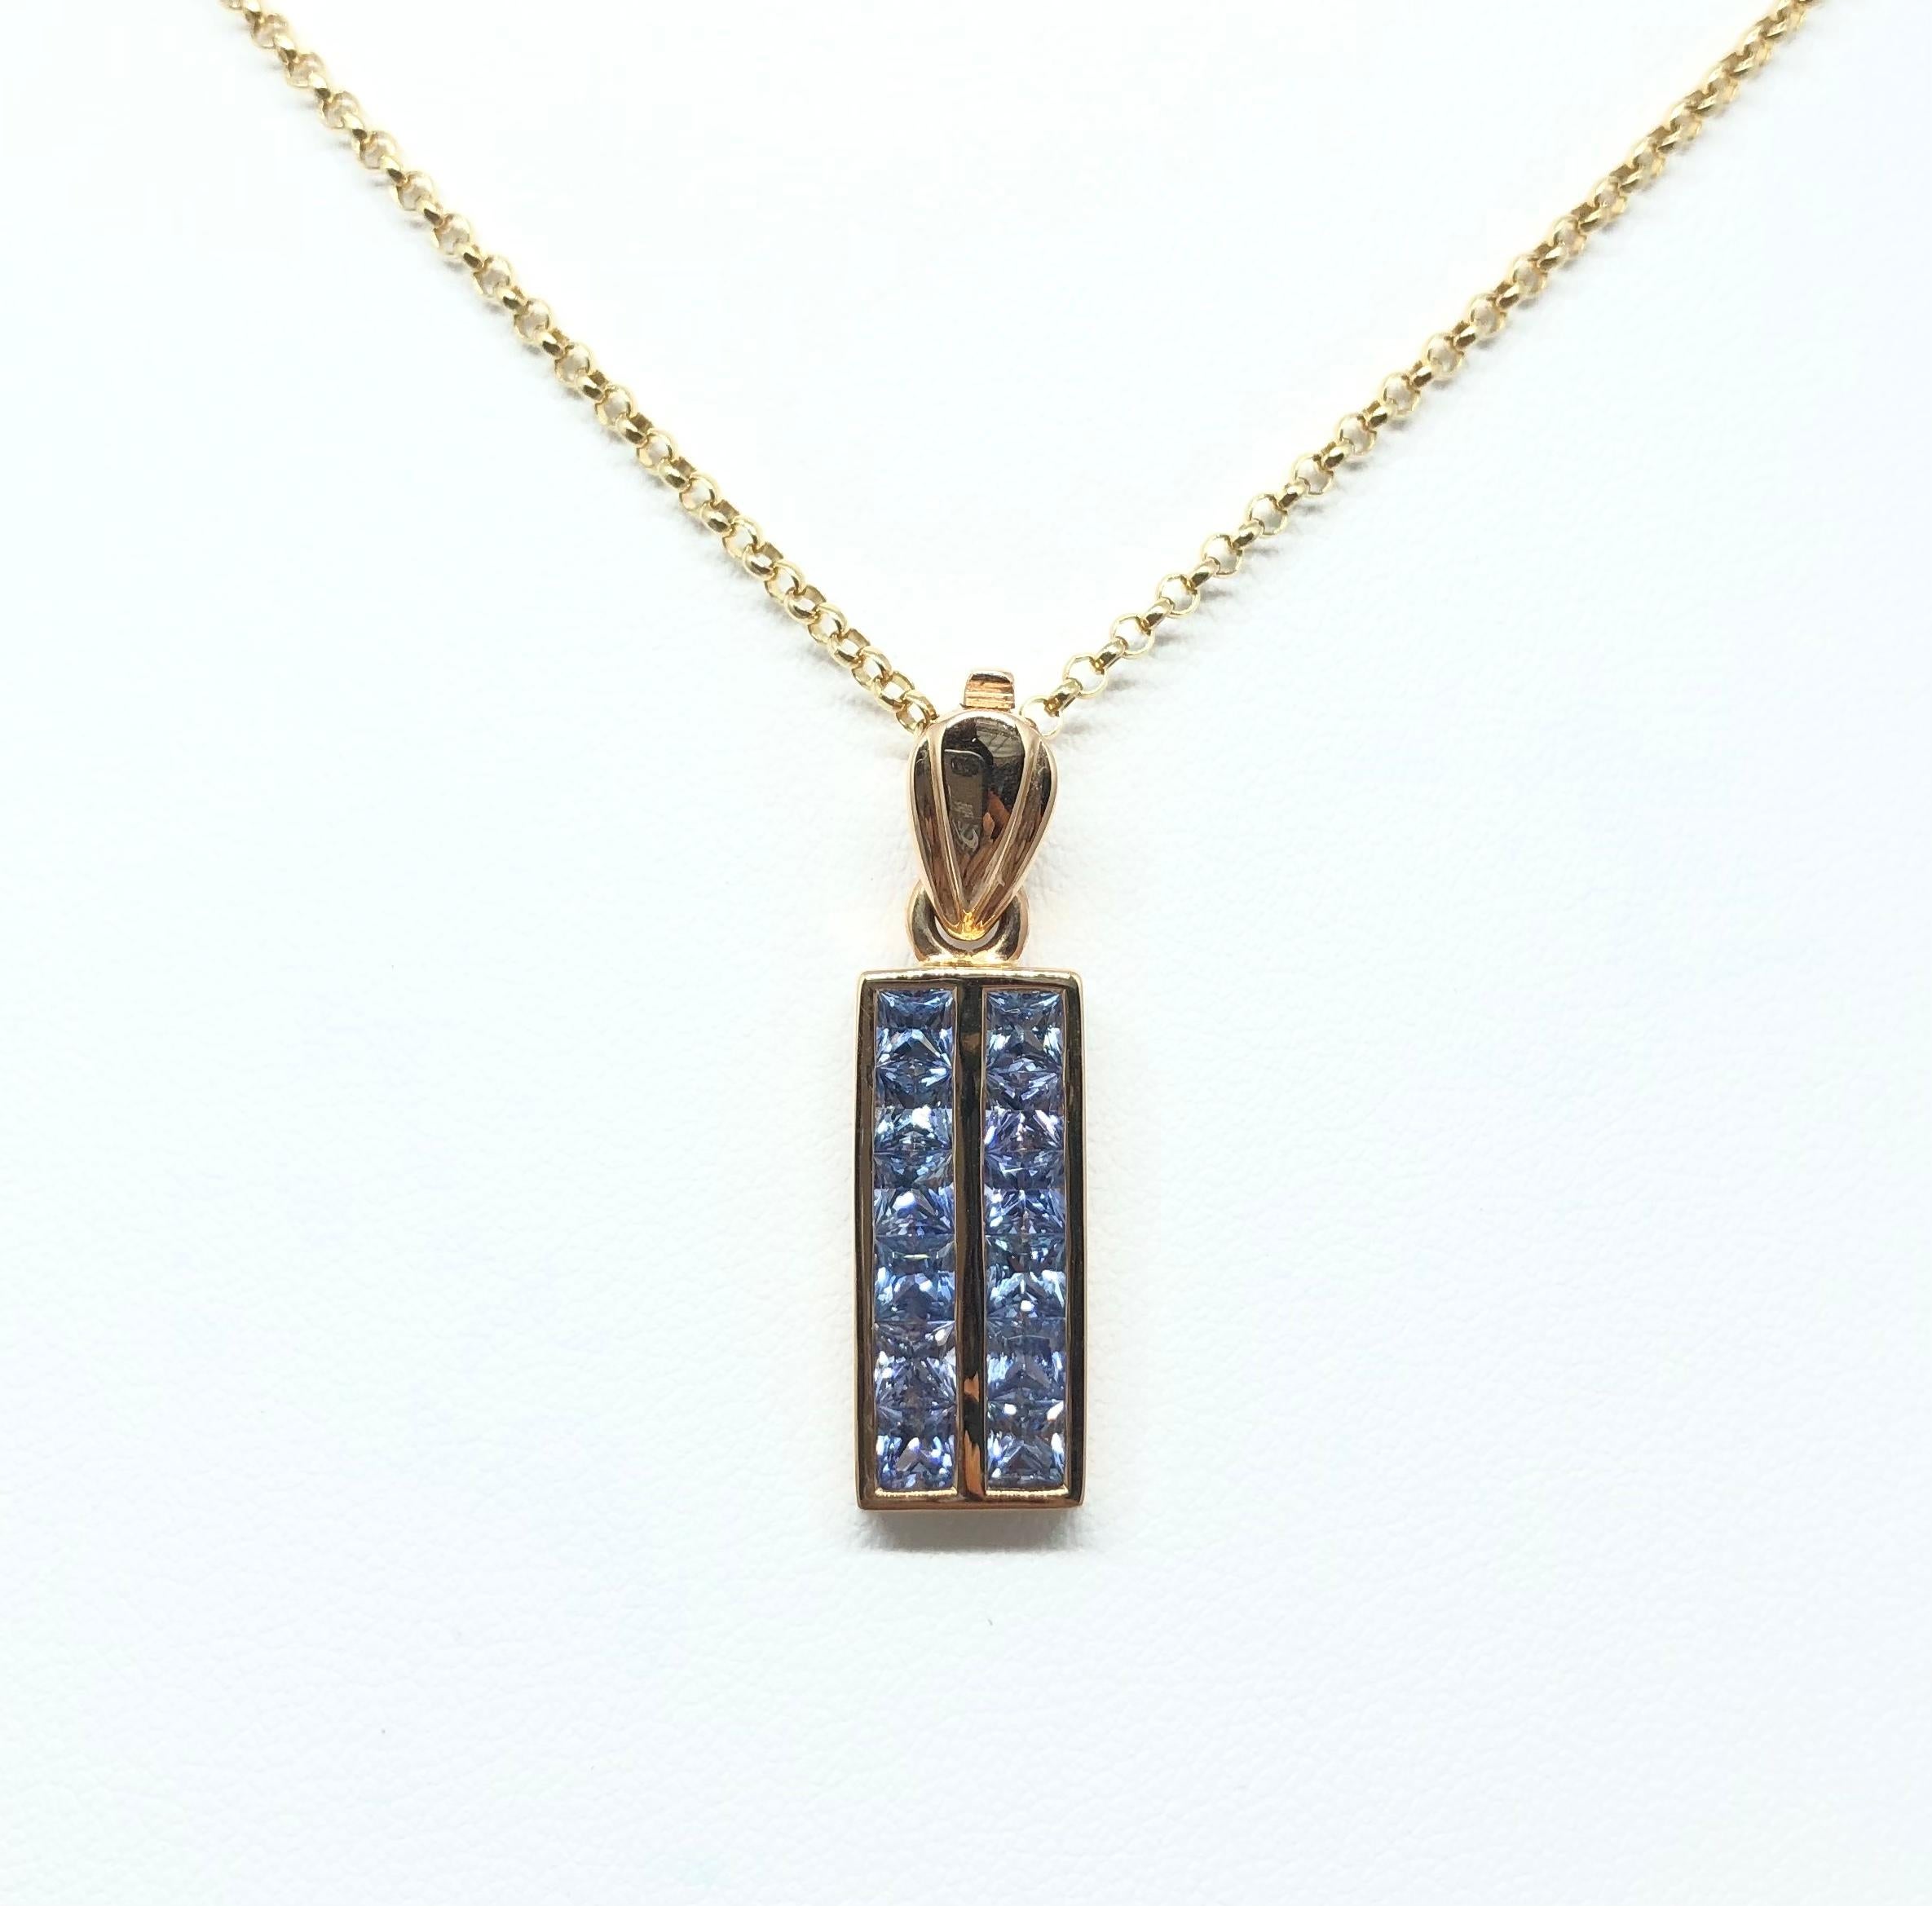 Blue Sapphire 2.26 carats Pendant set in 18 Karat Rose Gold Settings
(chain not included)

Width: 0.9 cm 
Length: 3.1 cm
Total Weight: 4.74  grams

